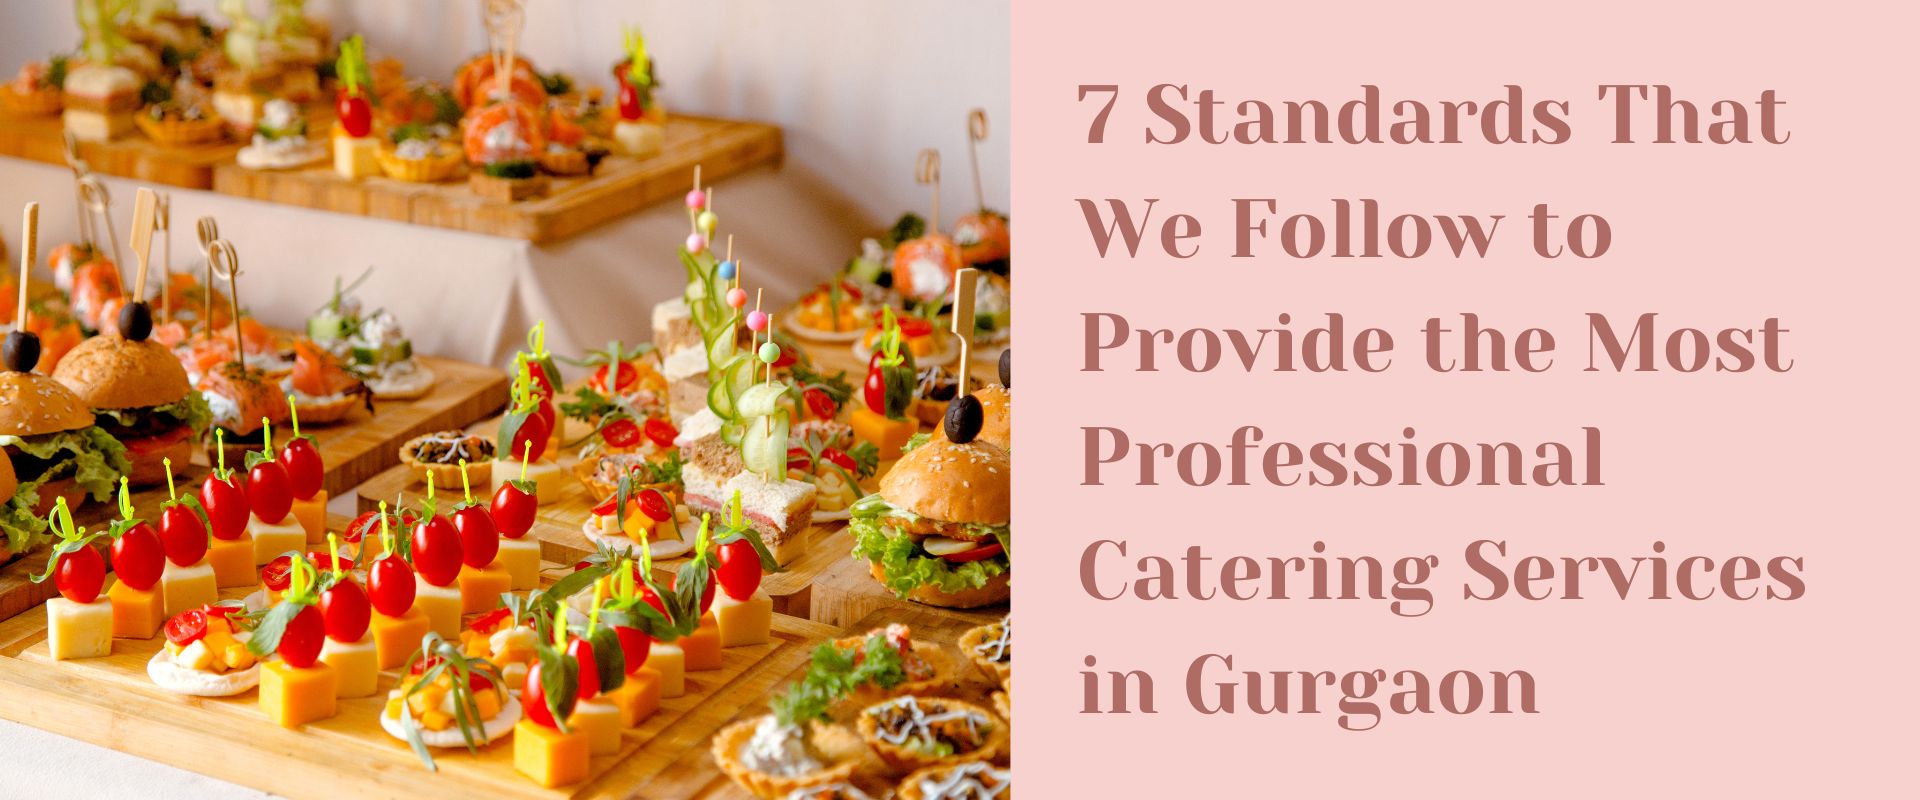 7 Standards That We Follow to Provide the Most Professional Catering Services in Gurgaon (1)